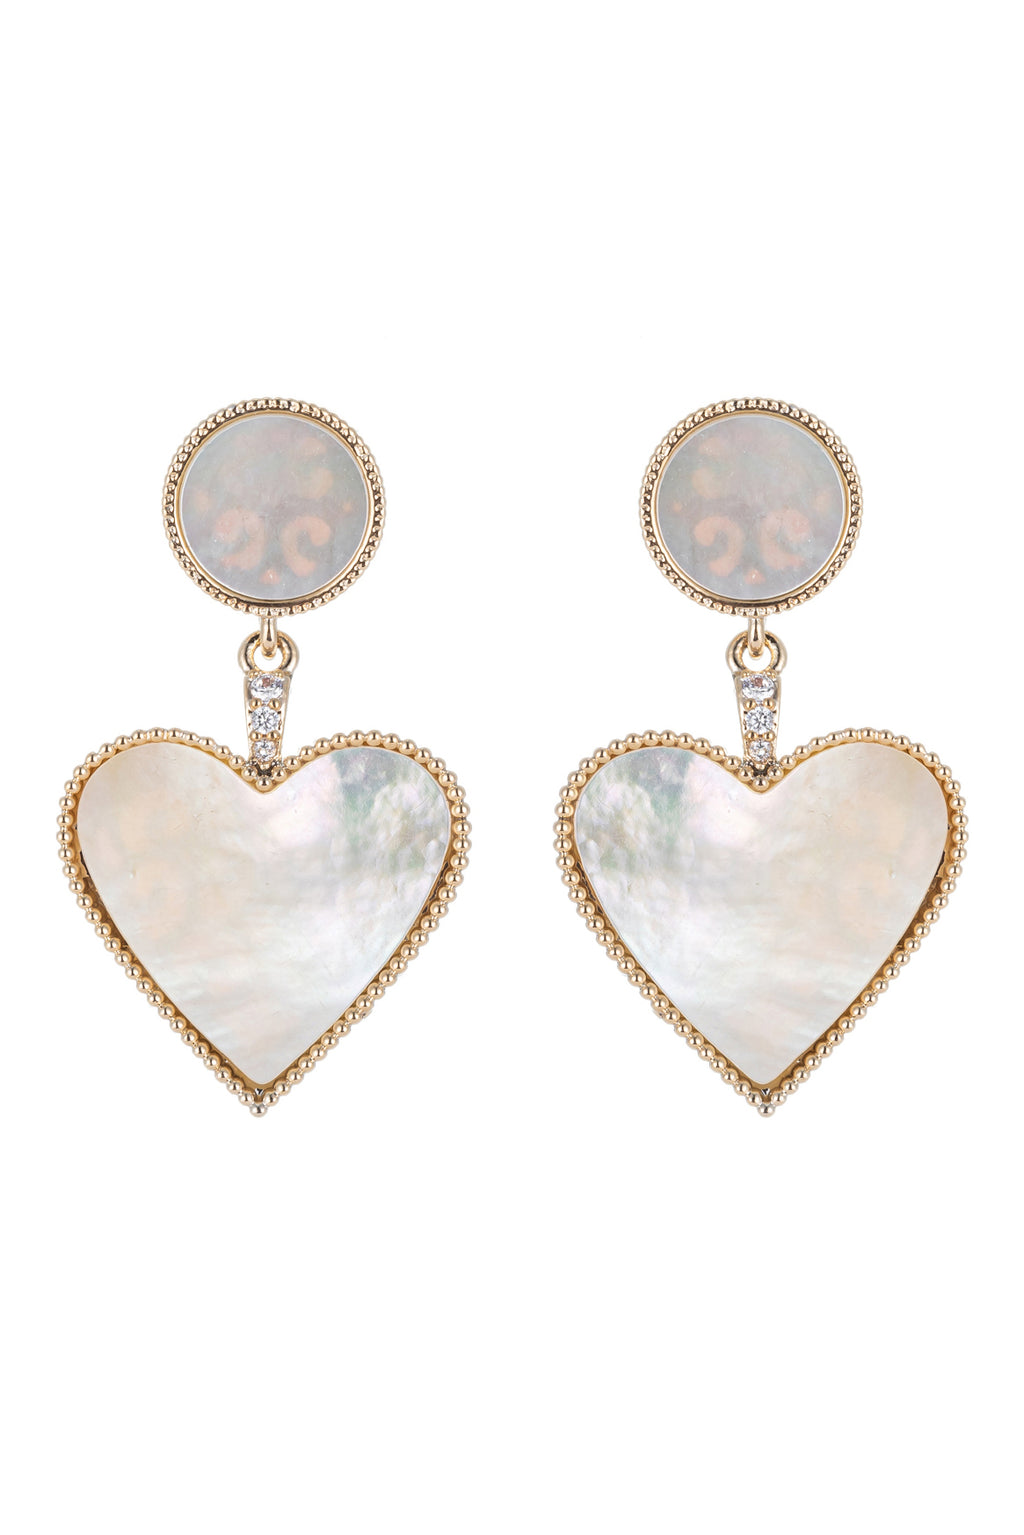 Shell pearl heart earrings studded with CZ crystals.